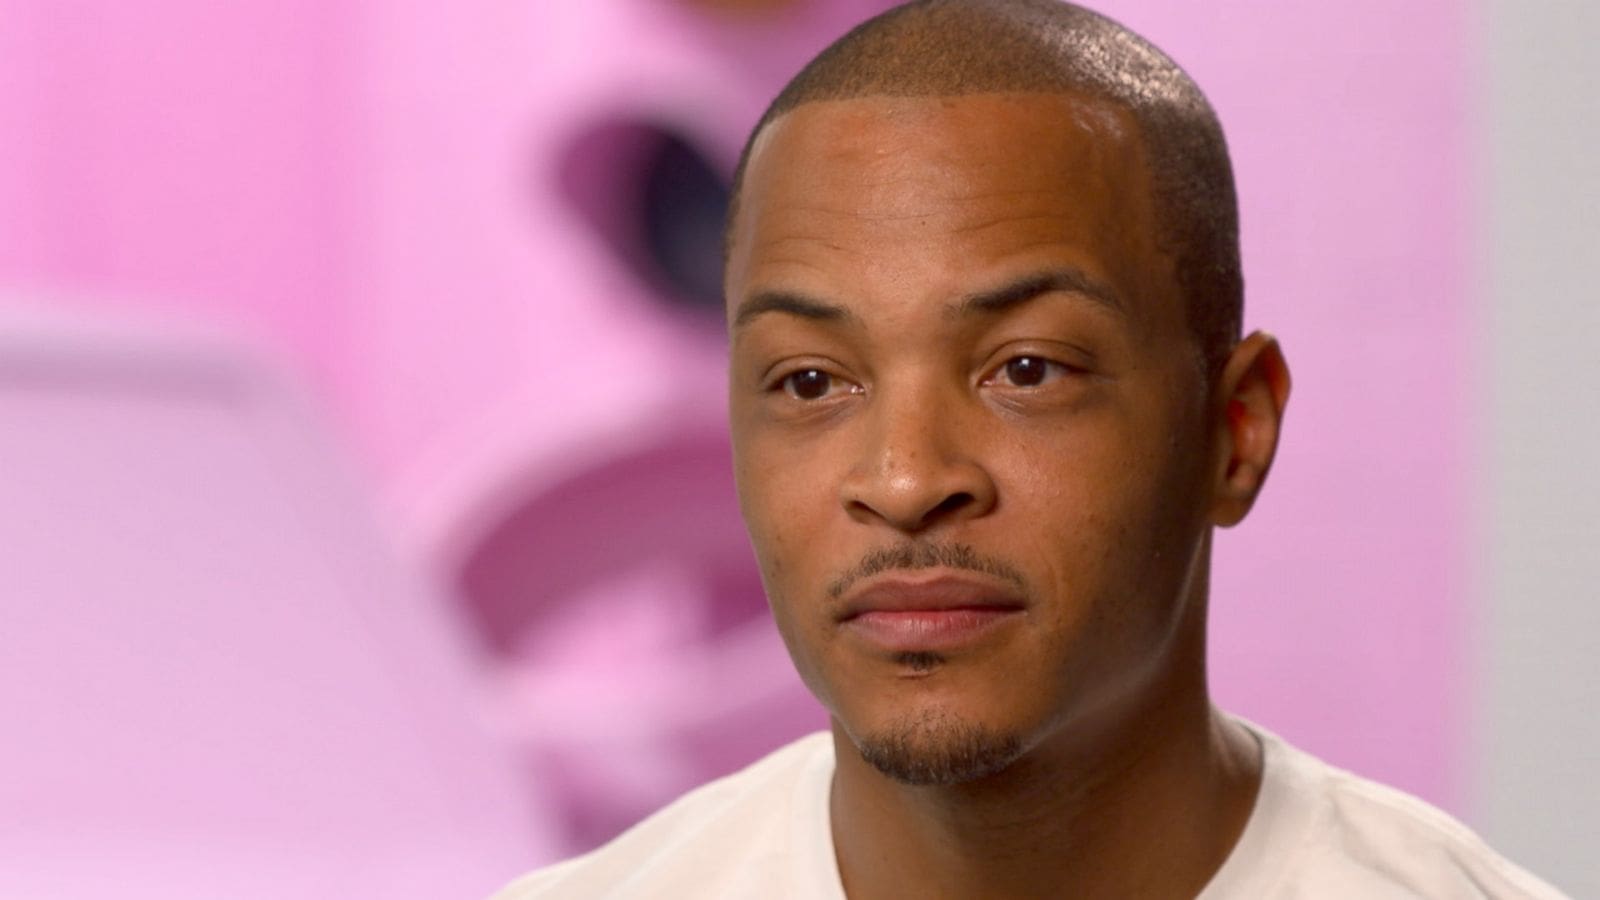 T.I. Shares A Throwback Photo Since The '90s: 'Young Legend'